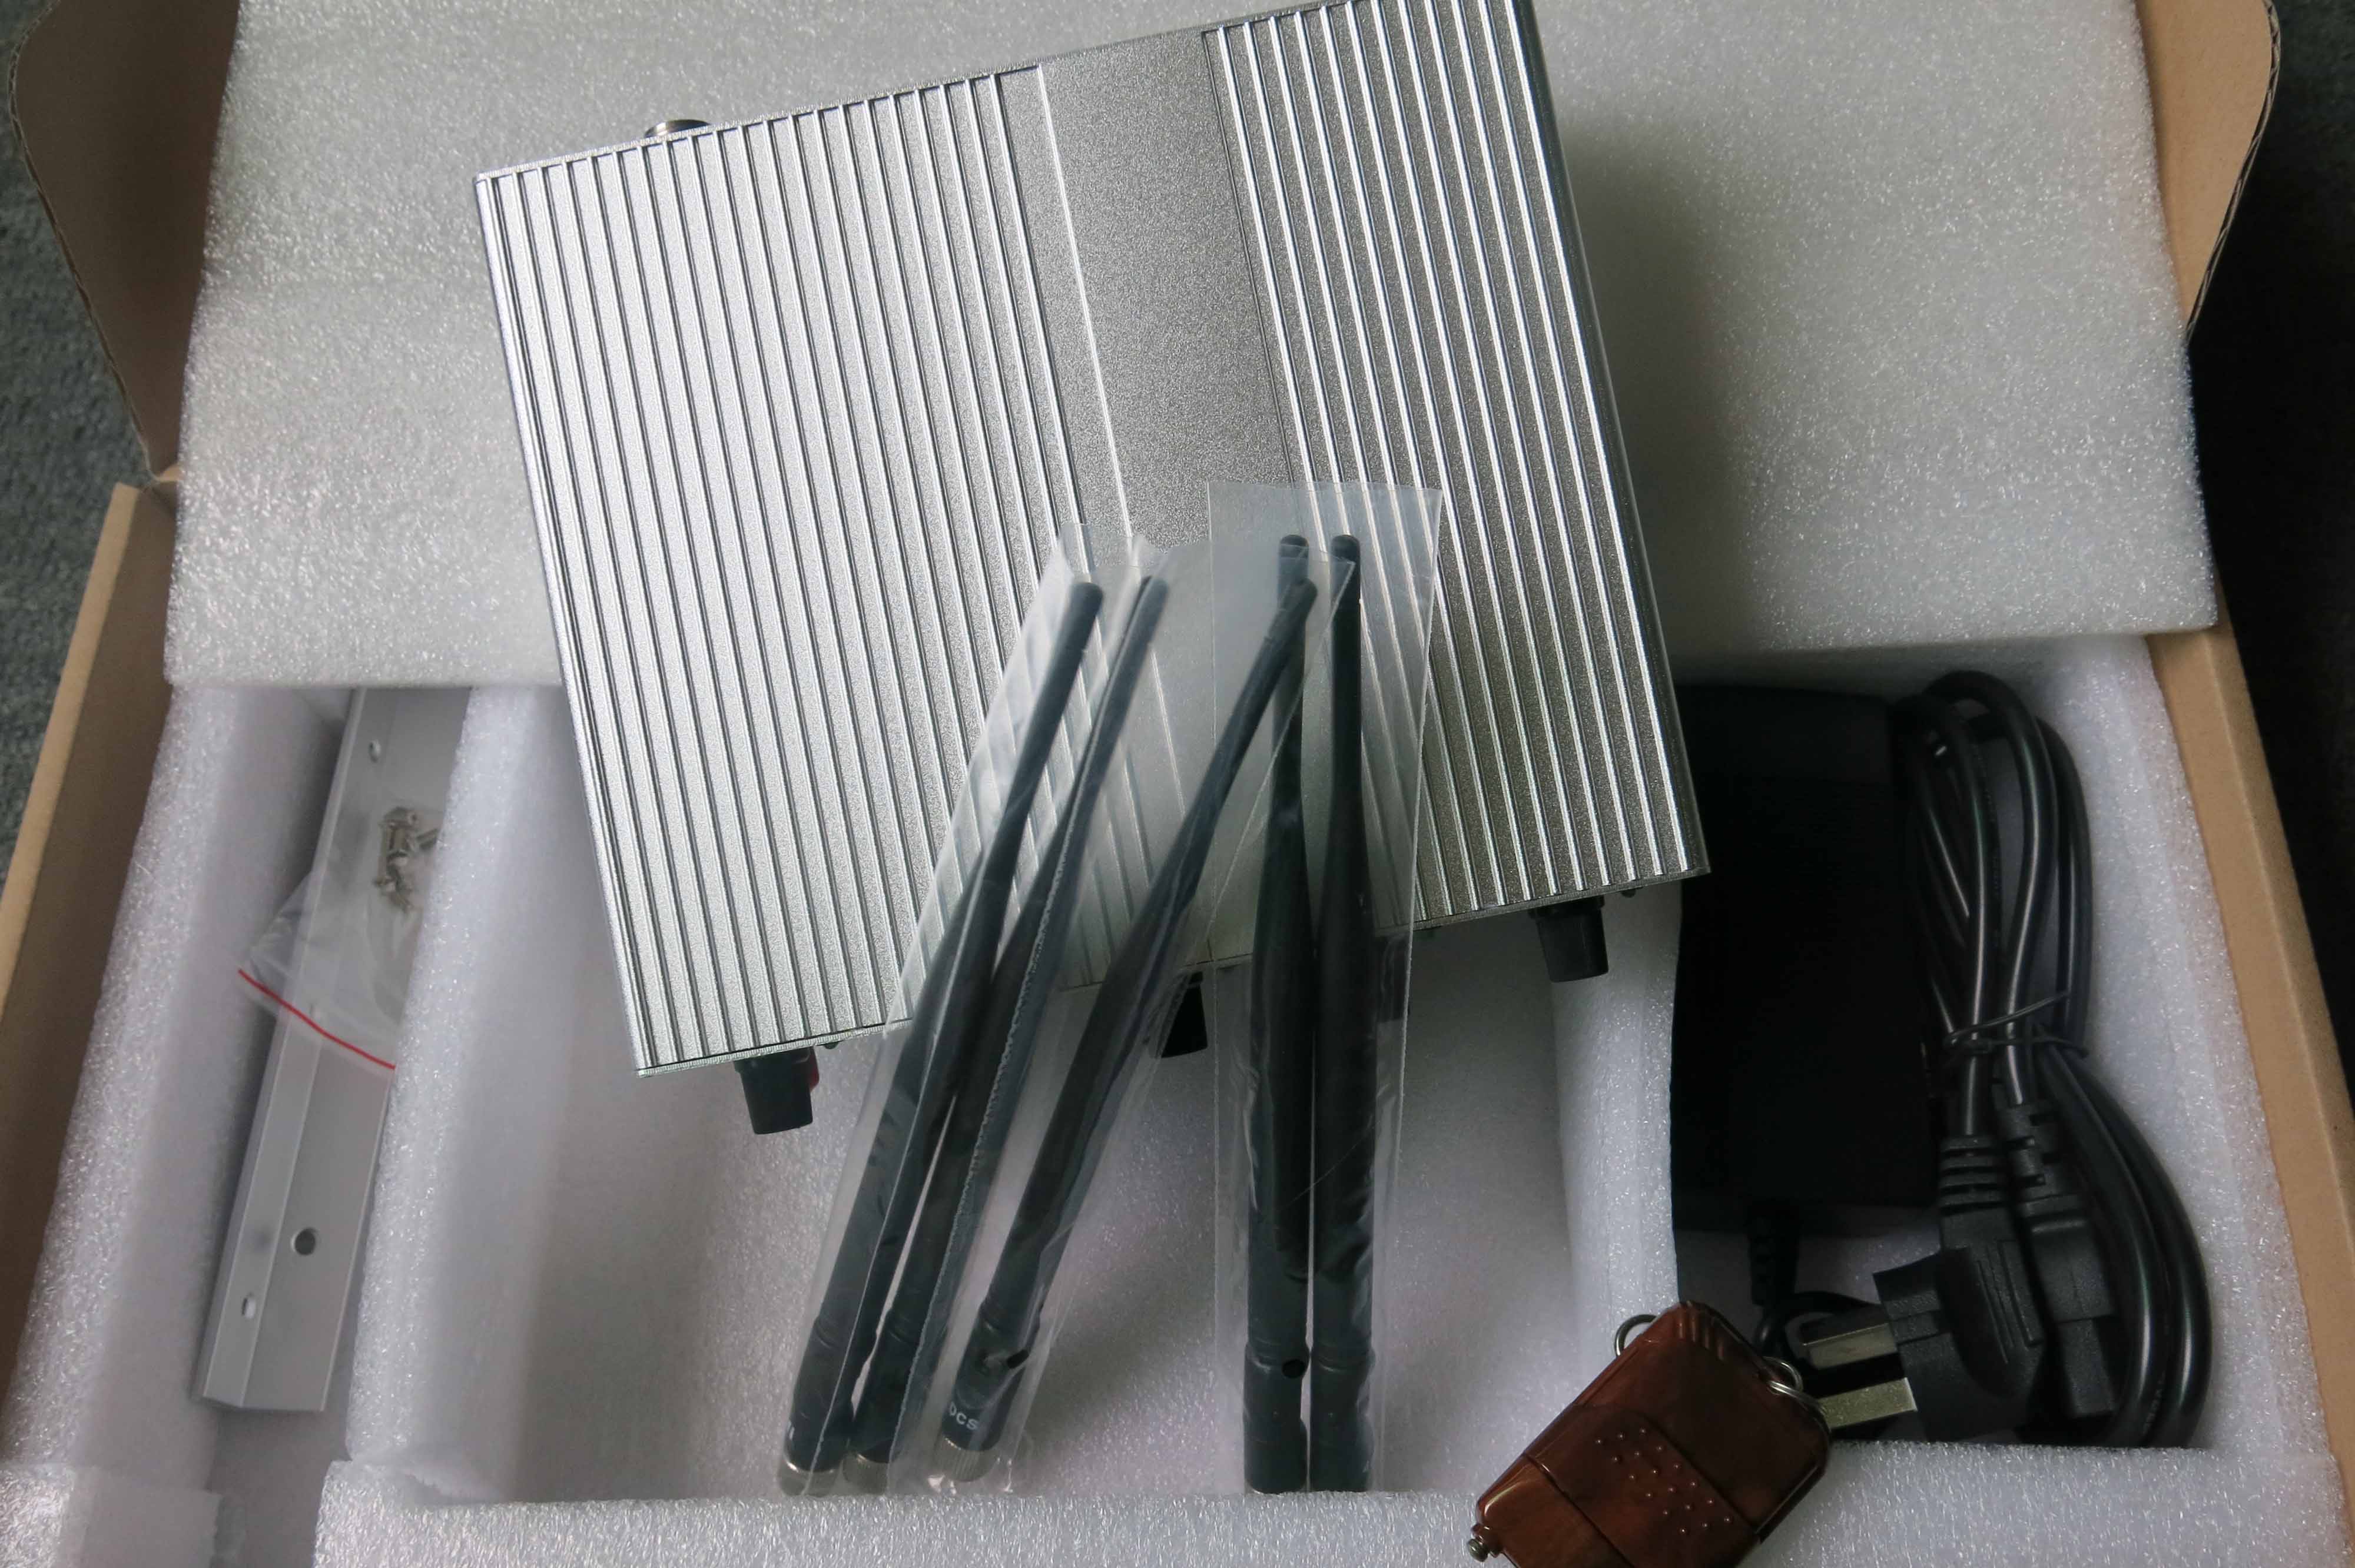 mobile phone jammer